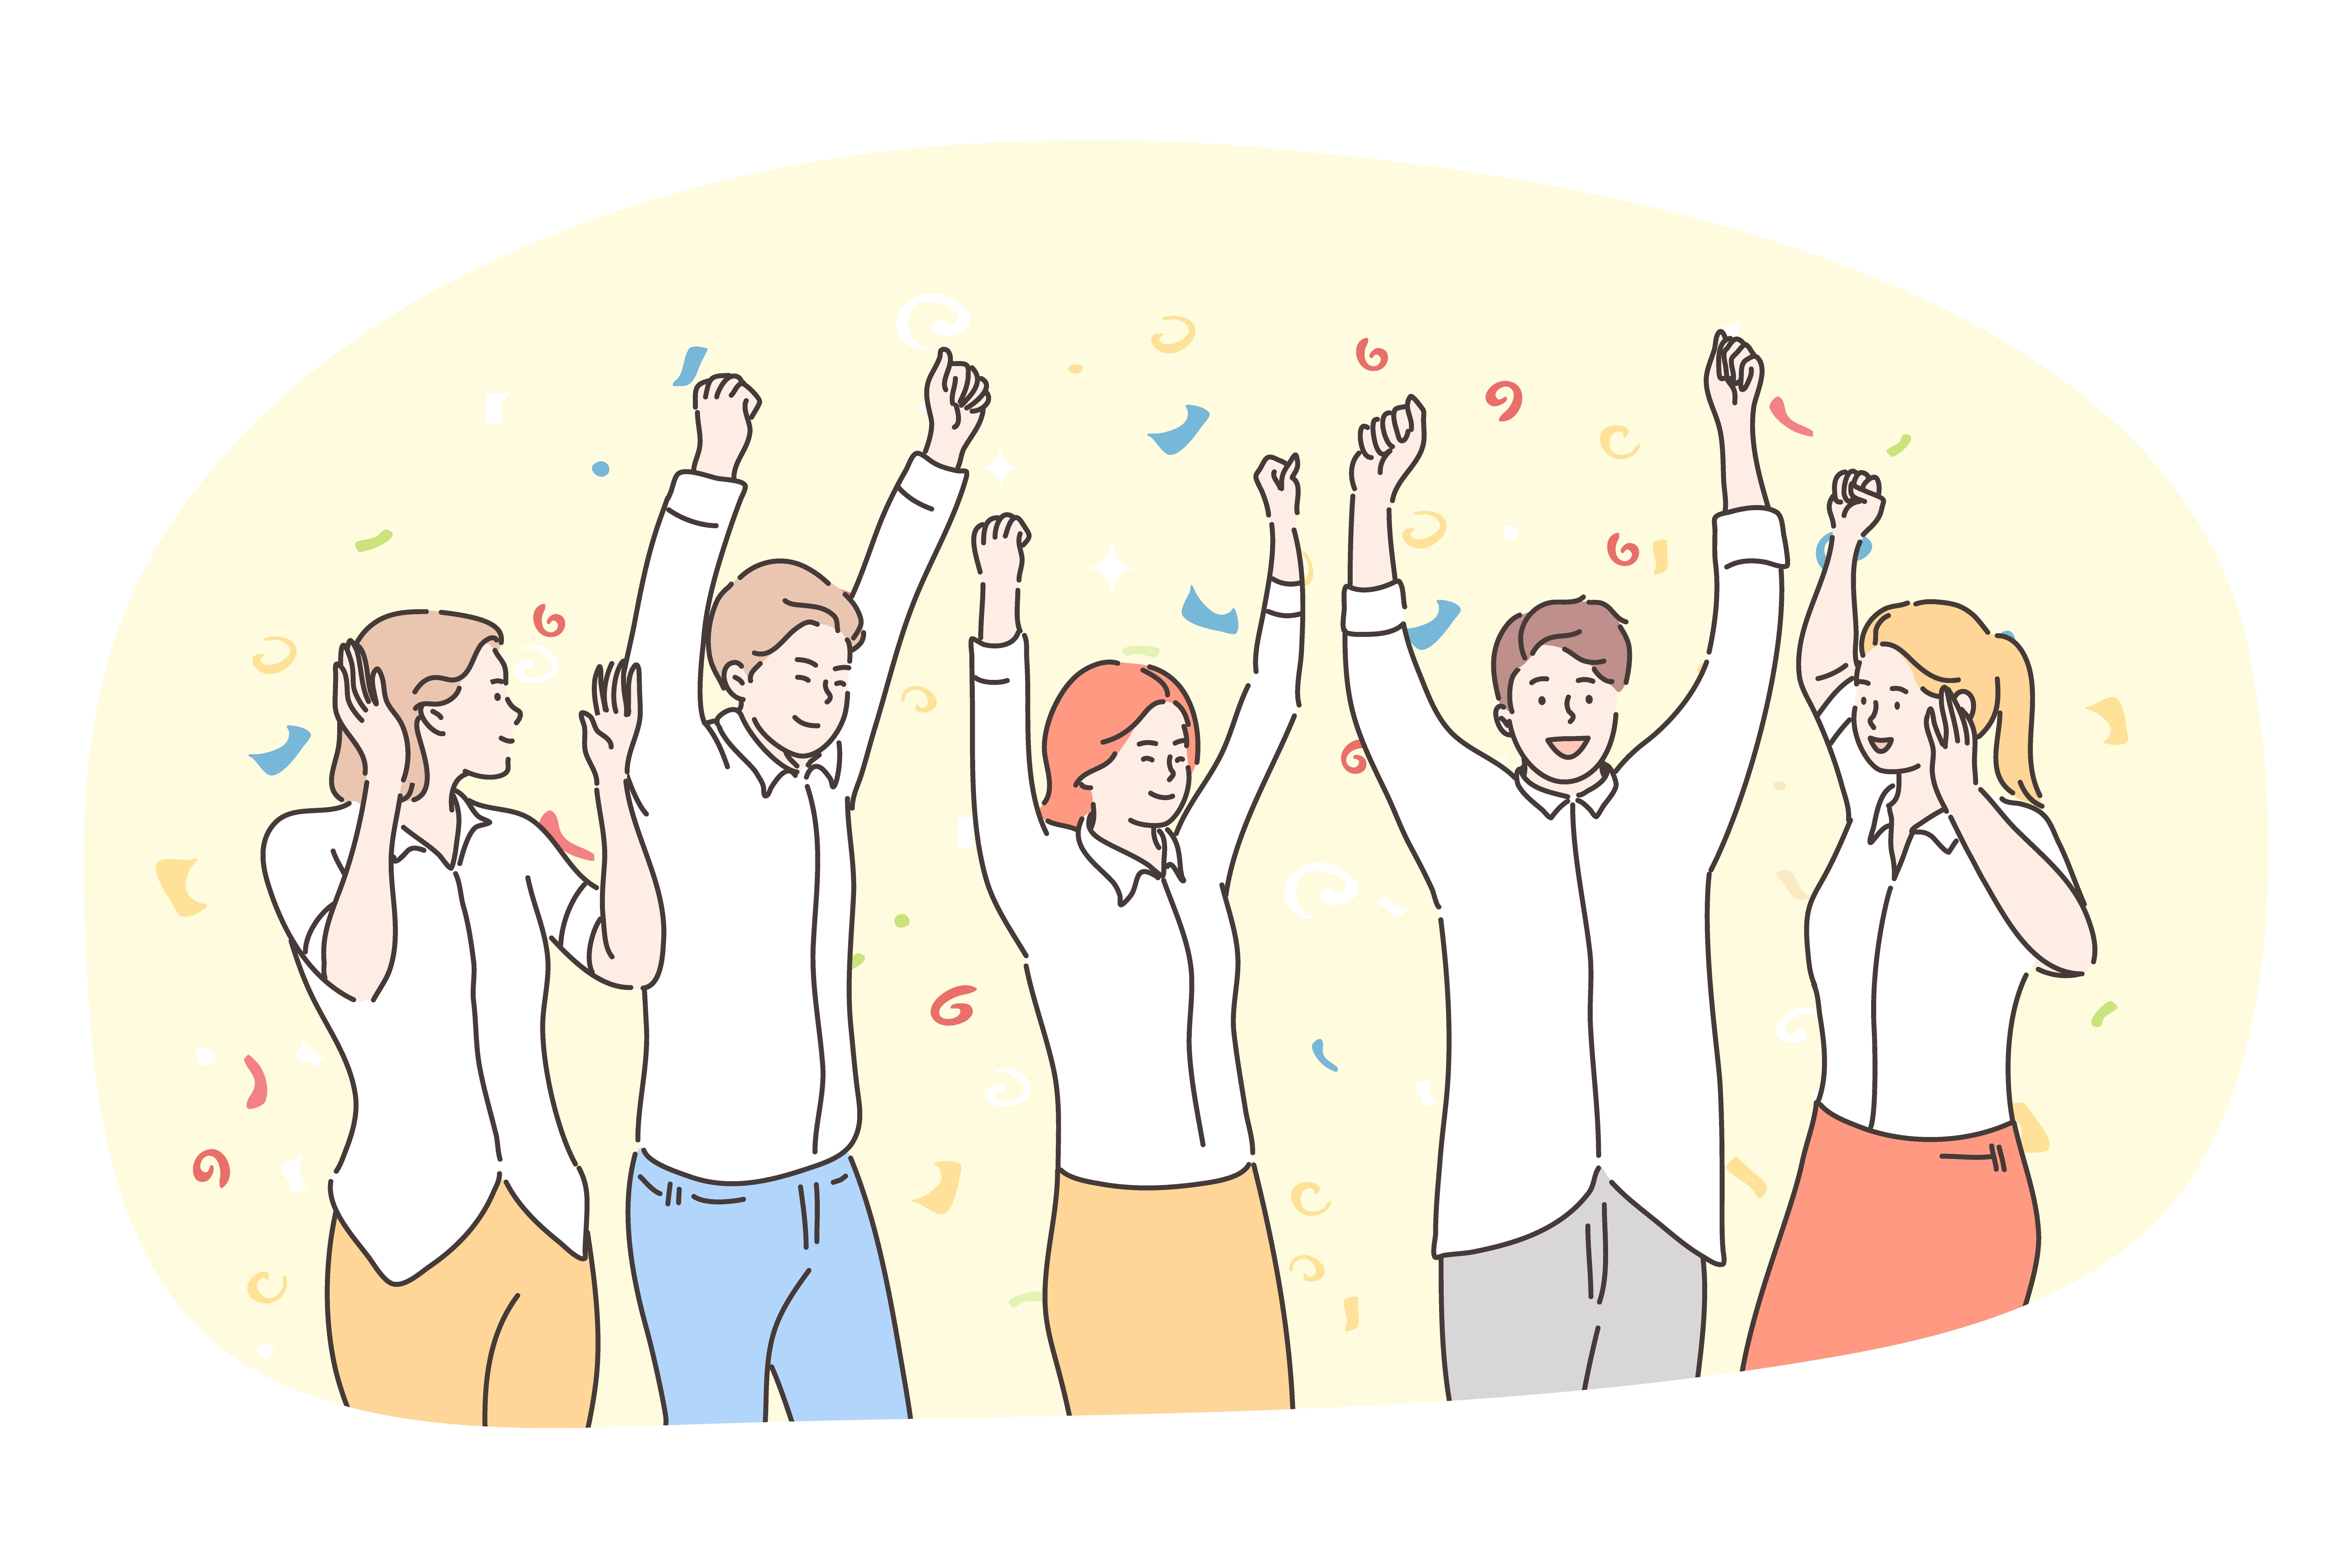 Party, having fun, celebration, holiday concept. Group of happy smiling people friends teens dancing, celebrating holiday and feeling excited with hands raised up together. Fun, win, victory, team. Party, having fun, celebration, holiday concept